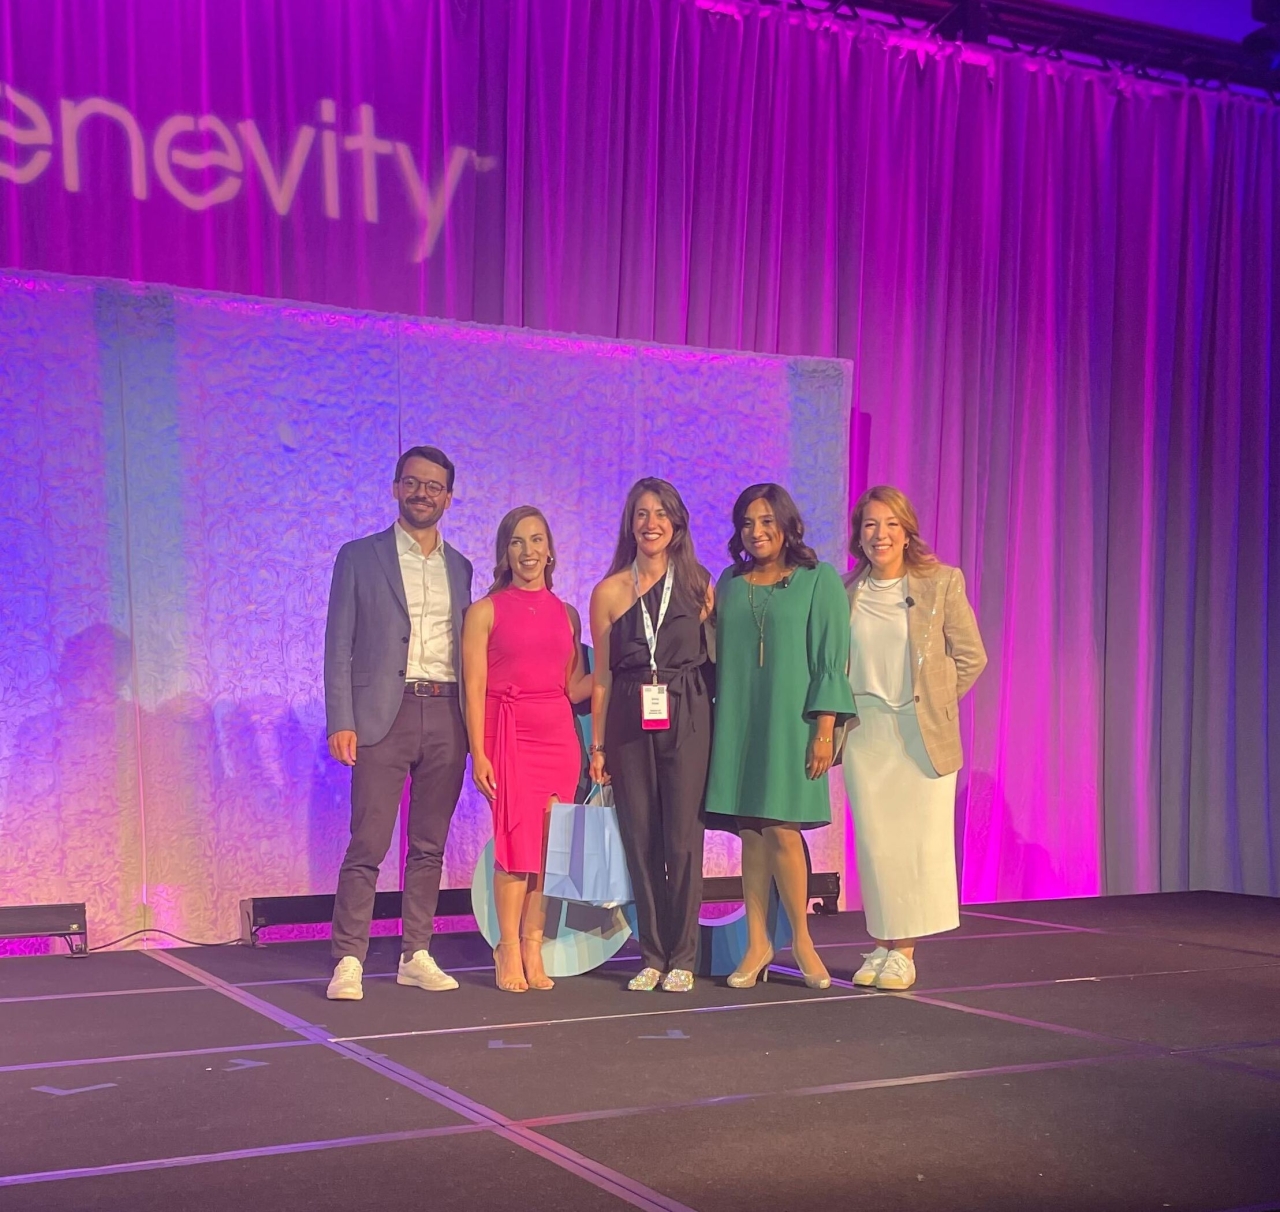 Subaru wins Benevity's NewB Award for new clients that created significant impact through a best-in-class corporate purpose program launch